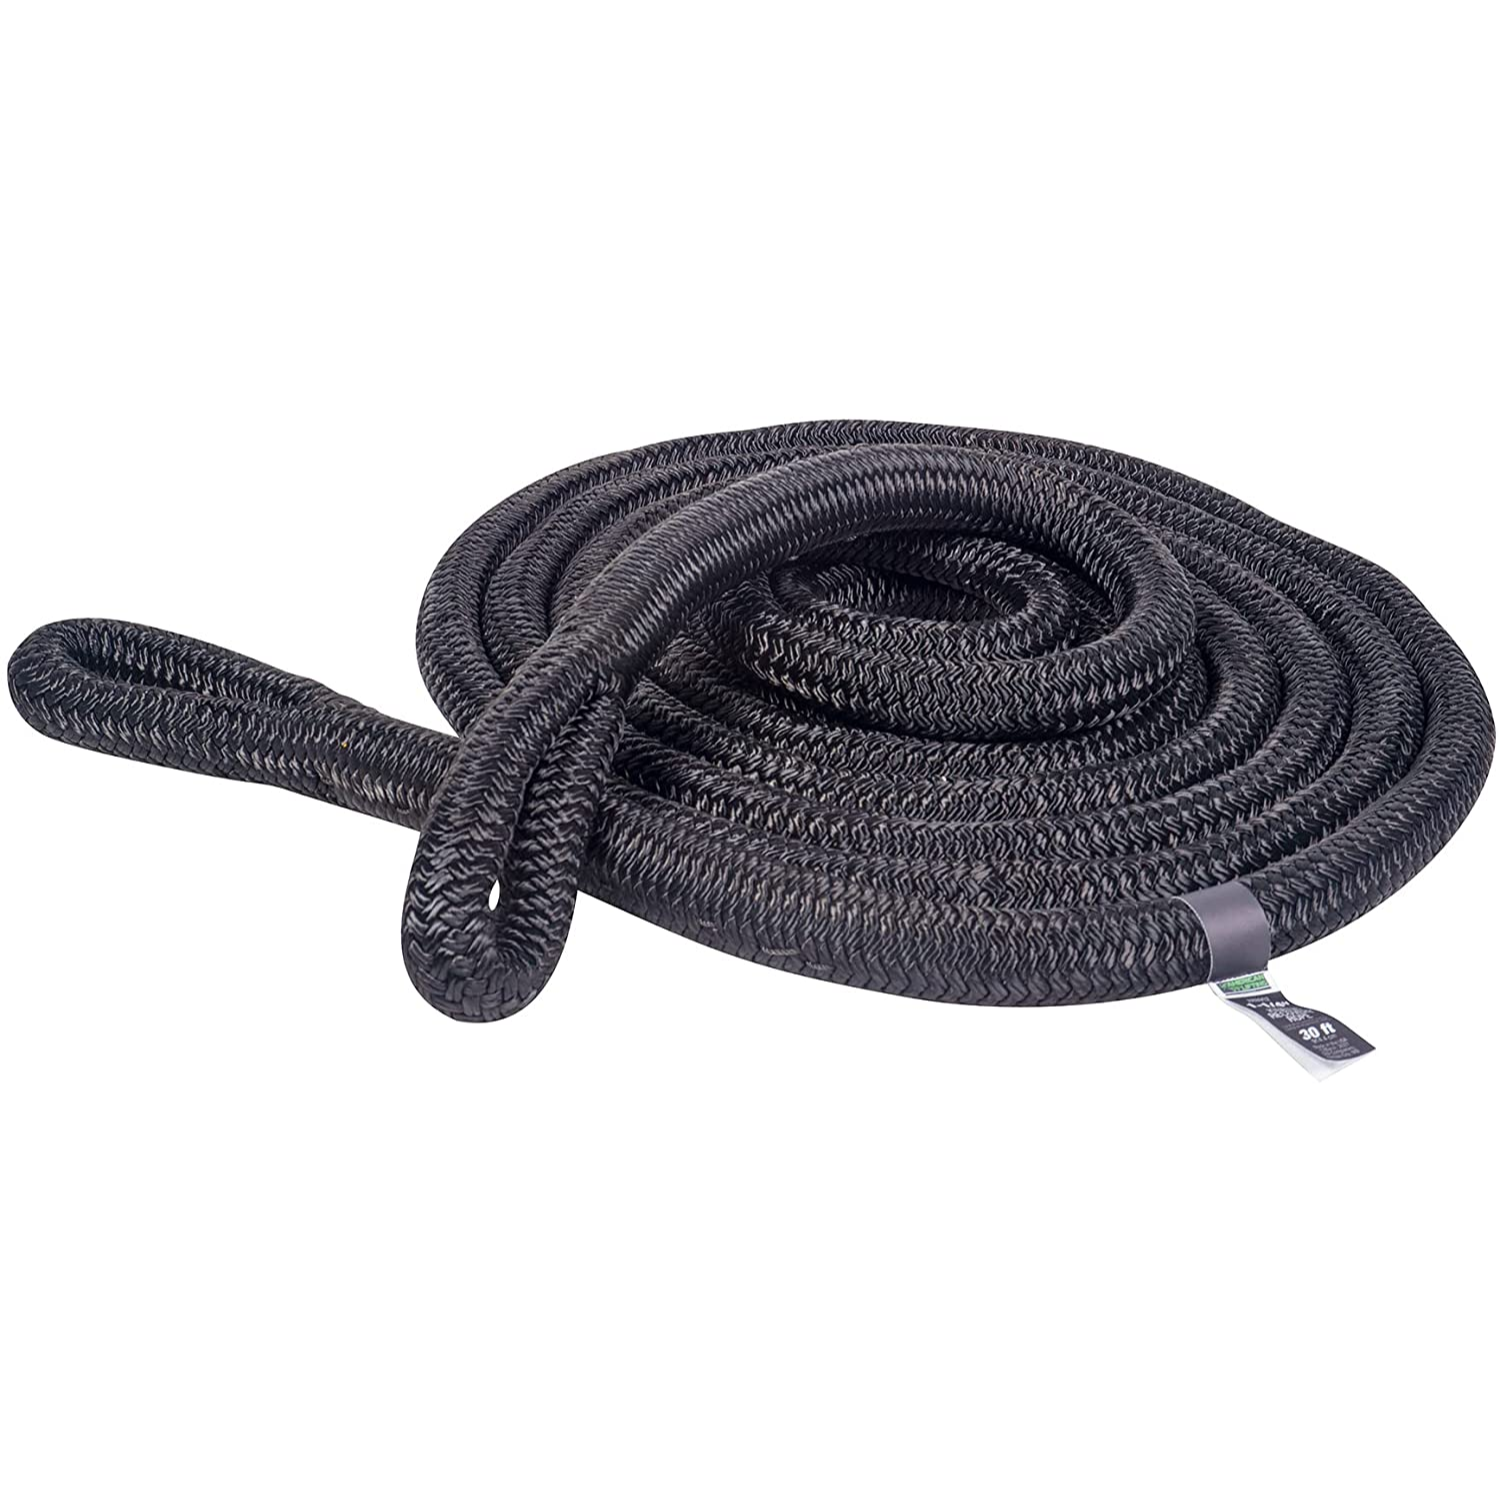 American Lifting Off-Road Kinetic Recovery Rope – Heavy Duty Tow Strap 52,000 Lbs